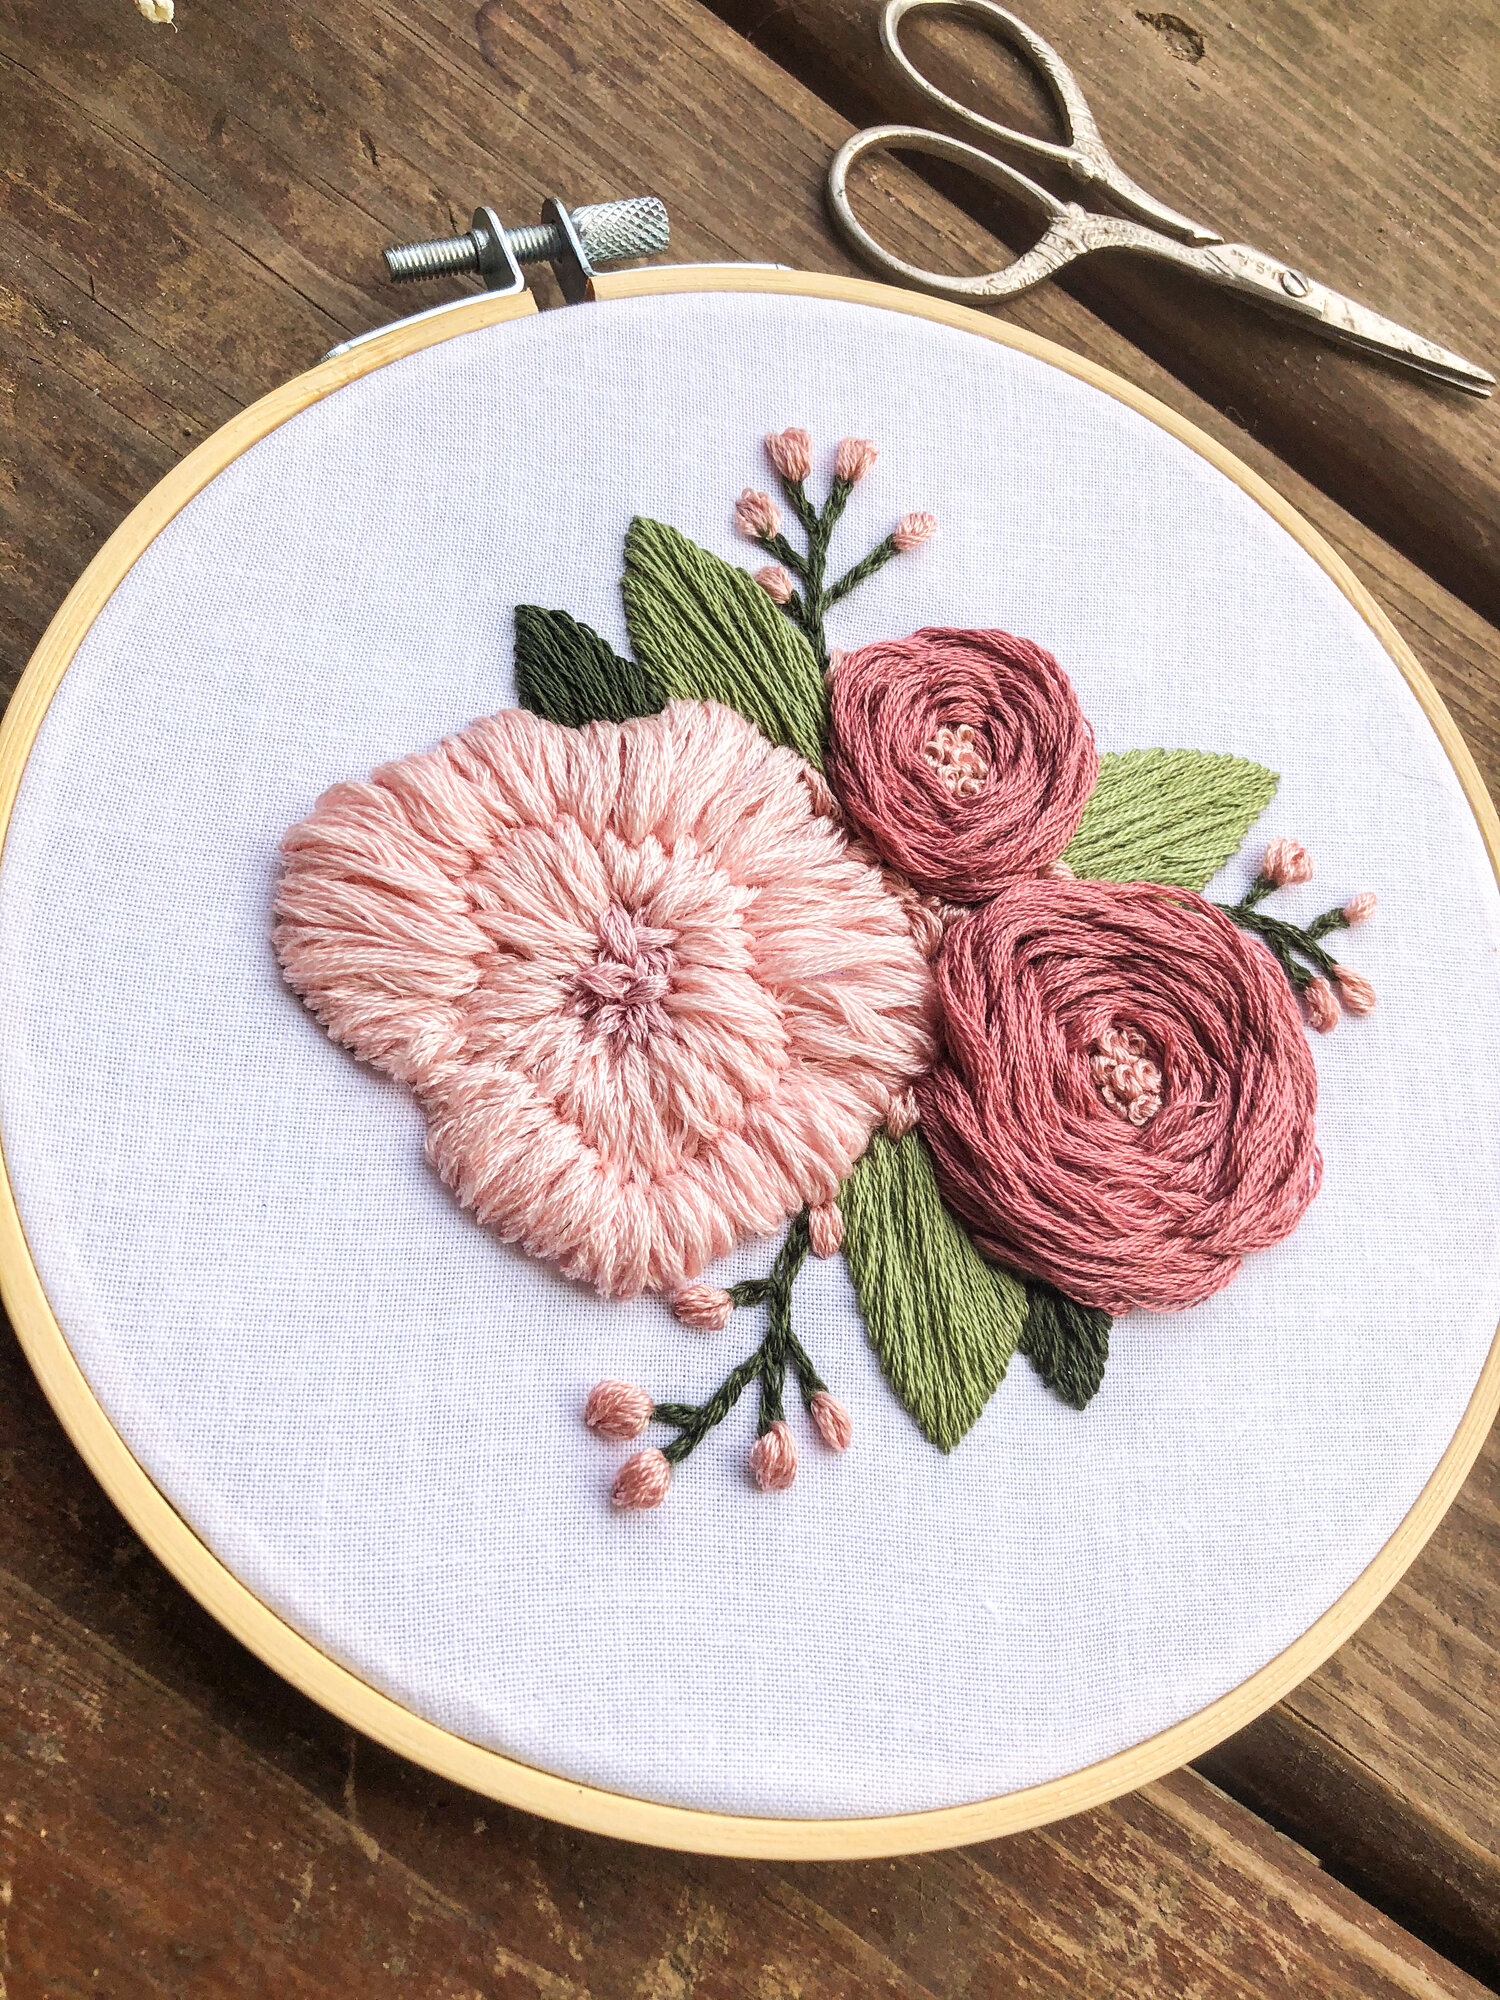 Embroidery Kit Floral Pattern Floral Kit DIY Floral Embroidery How to  Beginner Level Intermediate Level Patterns and How To 